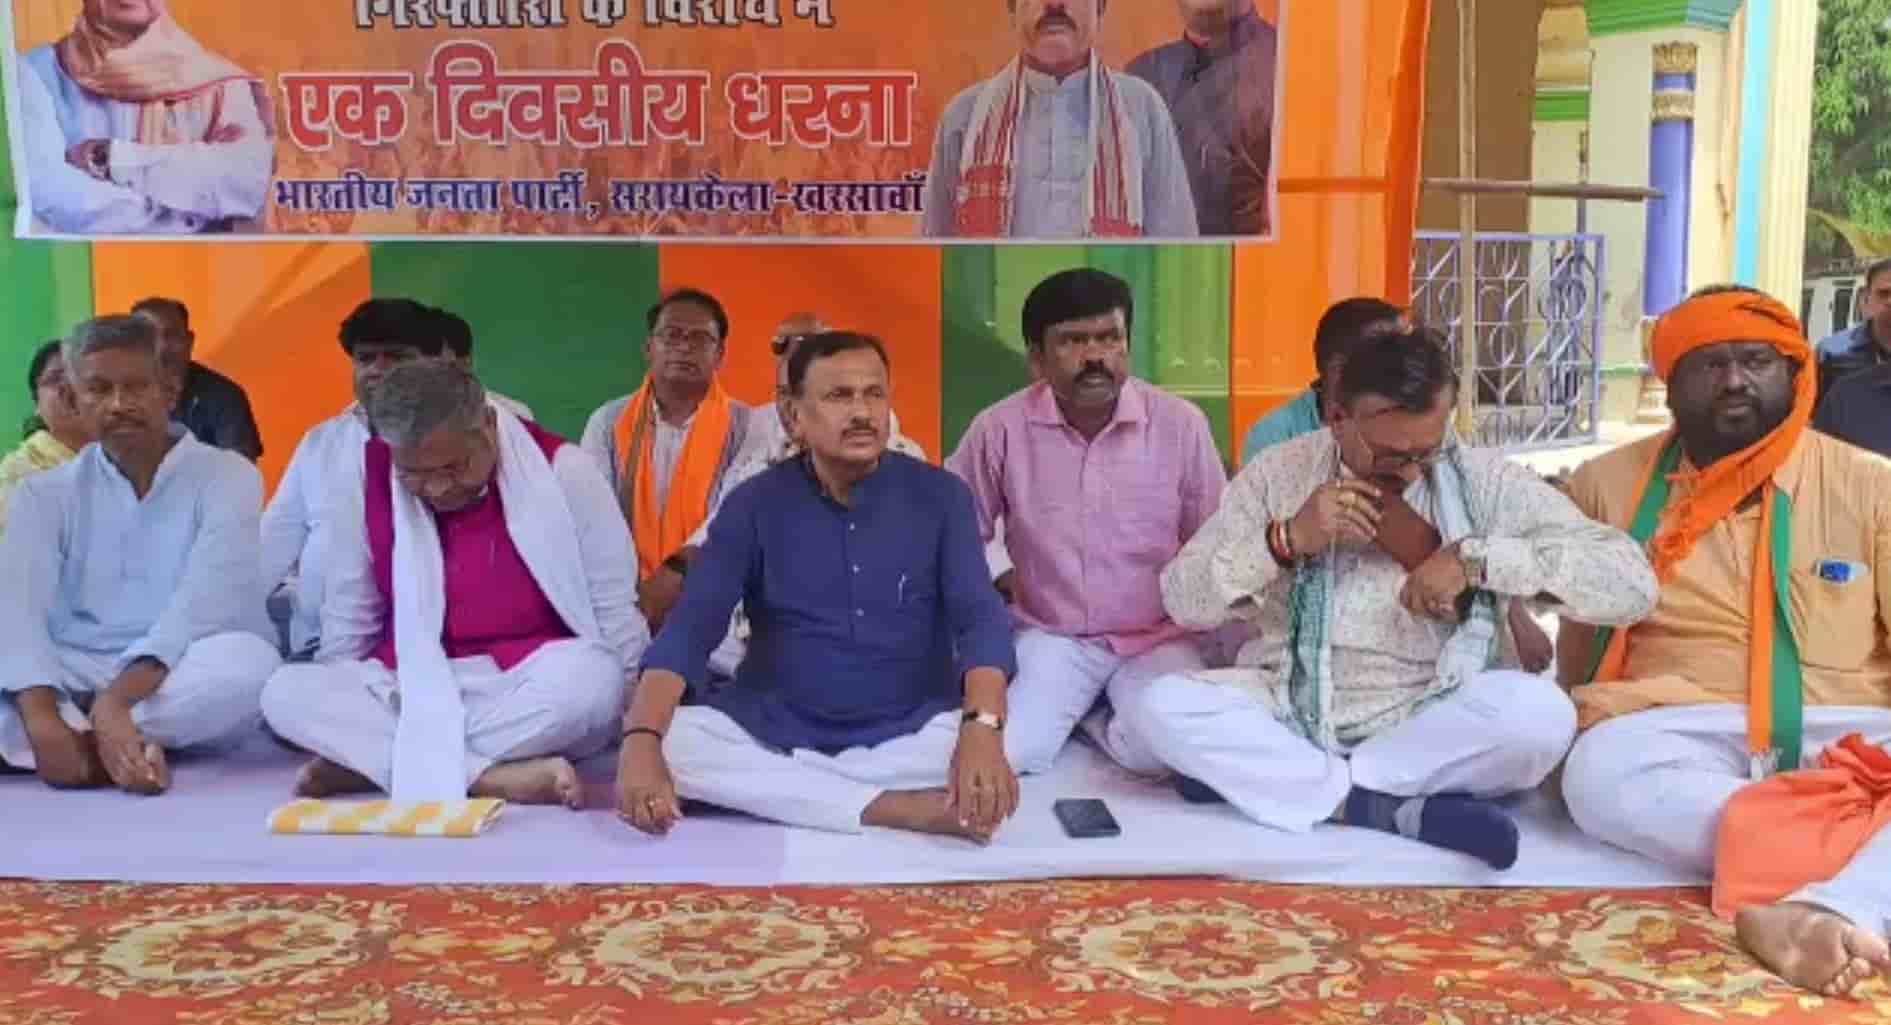 bjp dharna Senior BJP leaders including former Chief Minister Babulal Marandi staged a sit in demonstration against the Hemant government protesting the arrest of BJP leaders in Jamshedpur and demanding a CBI investigation Town Post